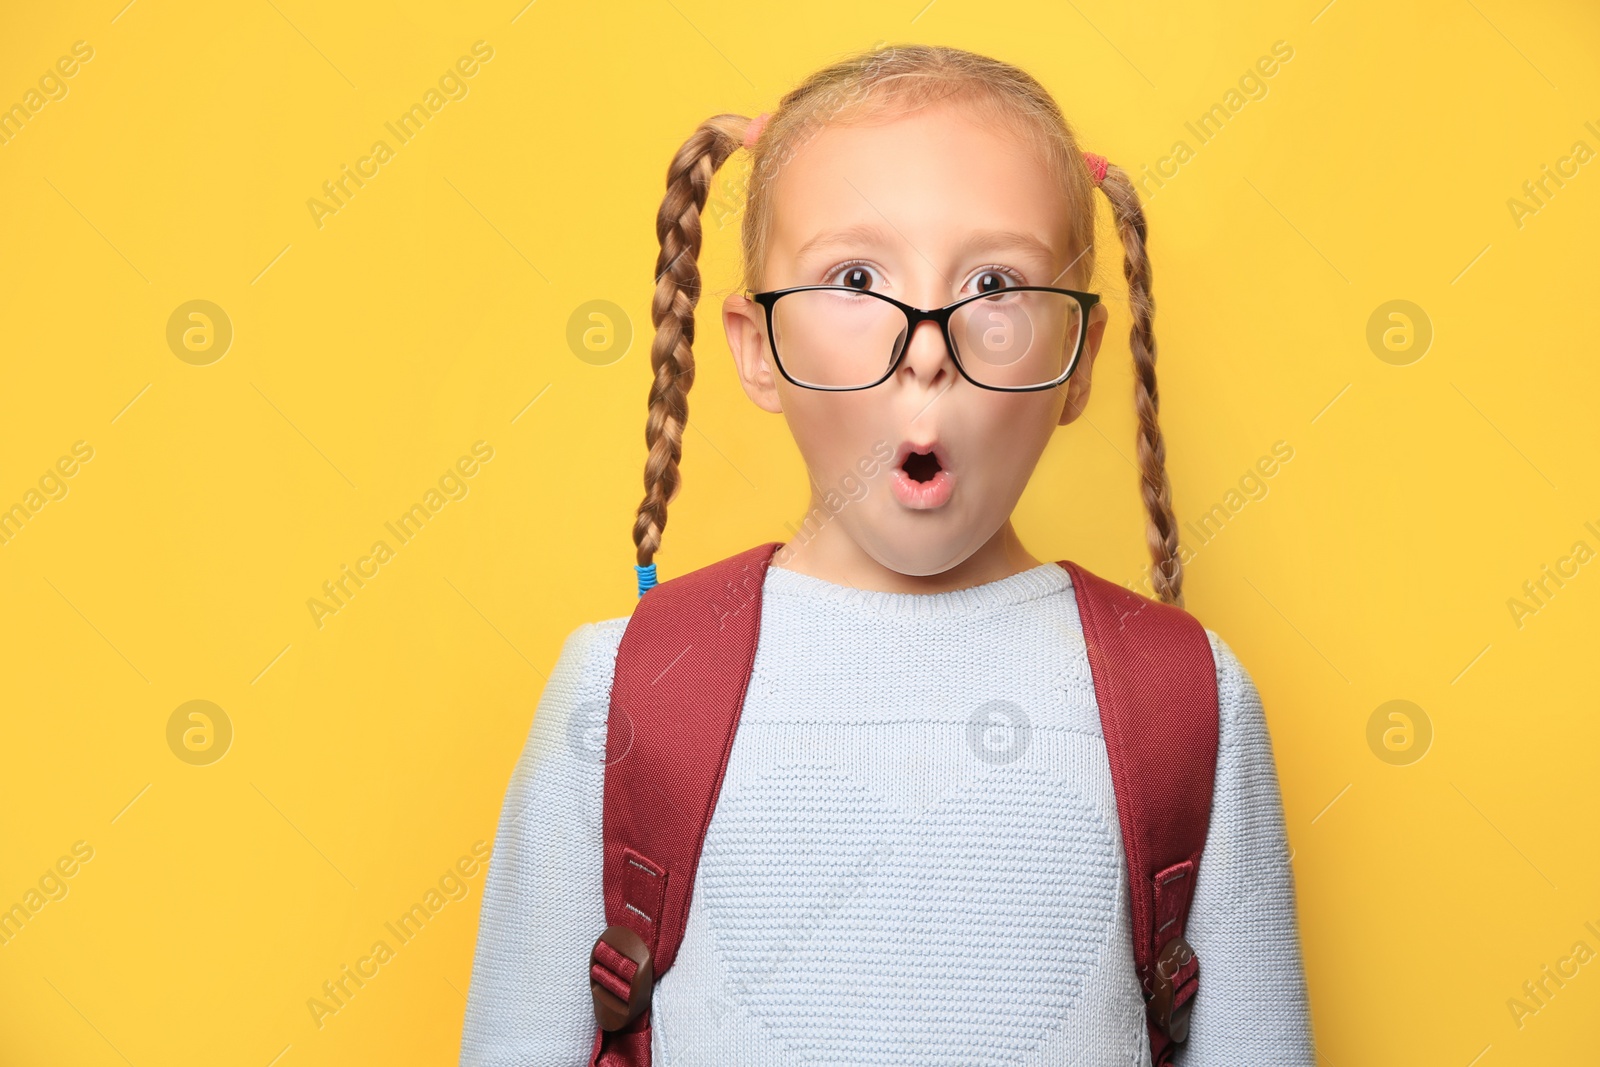 Photo of Cute little girl with backpack wearing glasses on yellow background